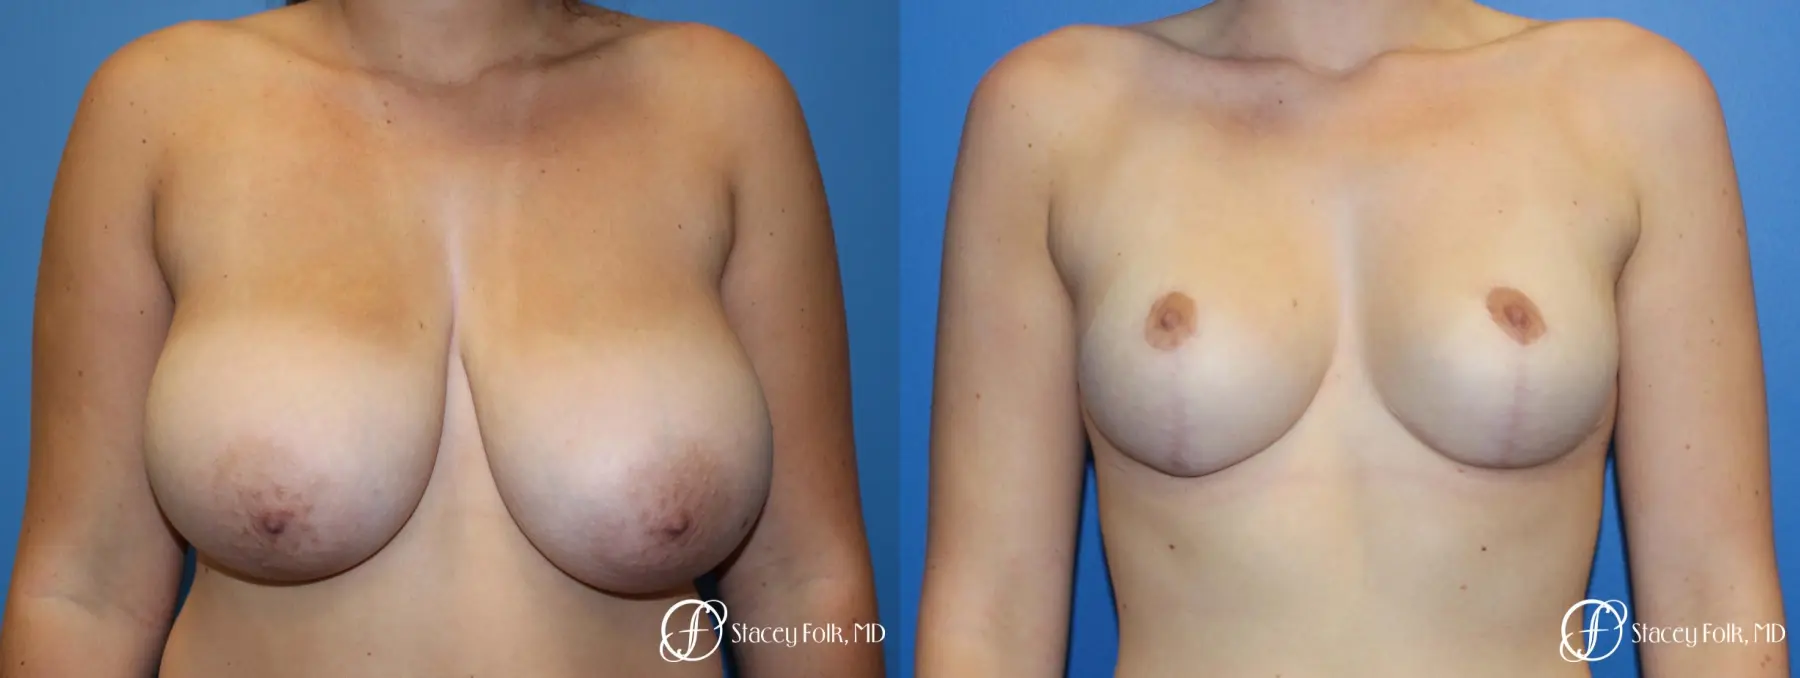 Denver Breast Lift - Mastopexy 10021 - Before and After